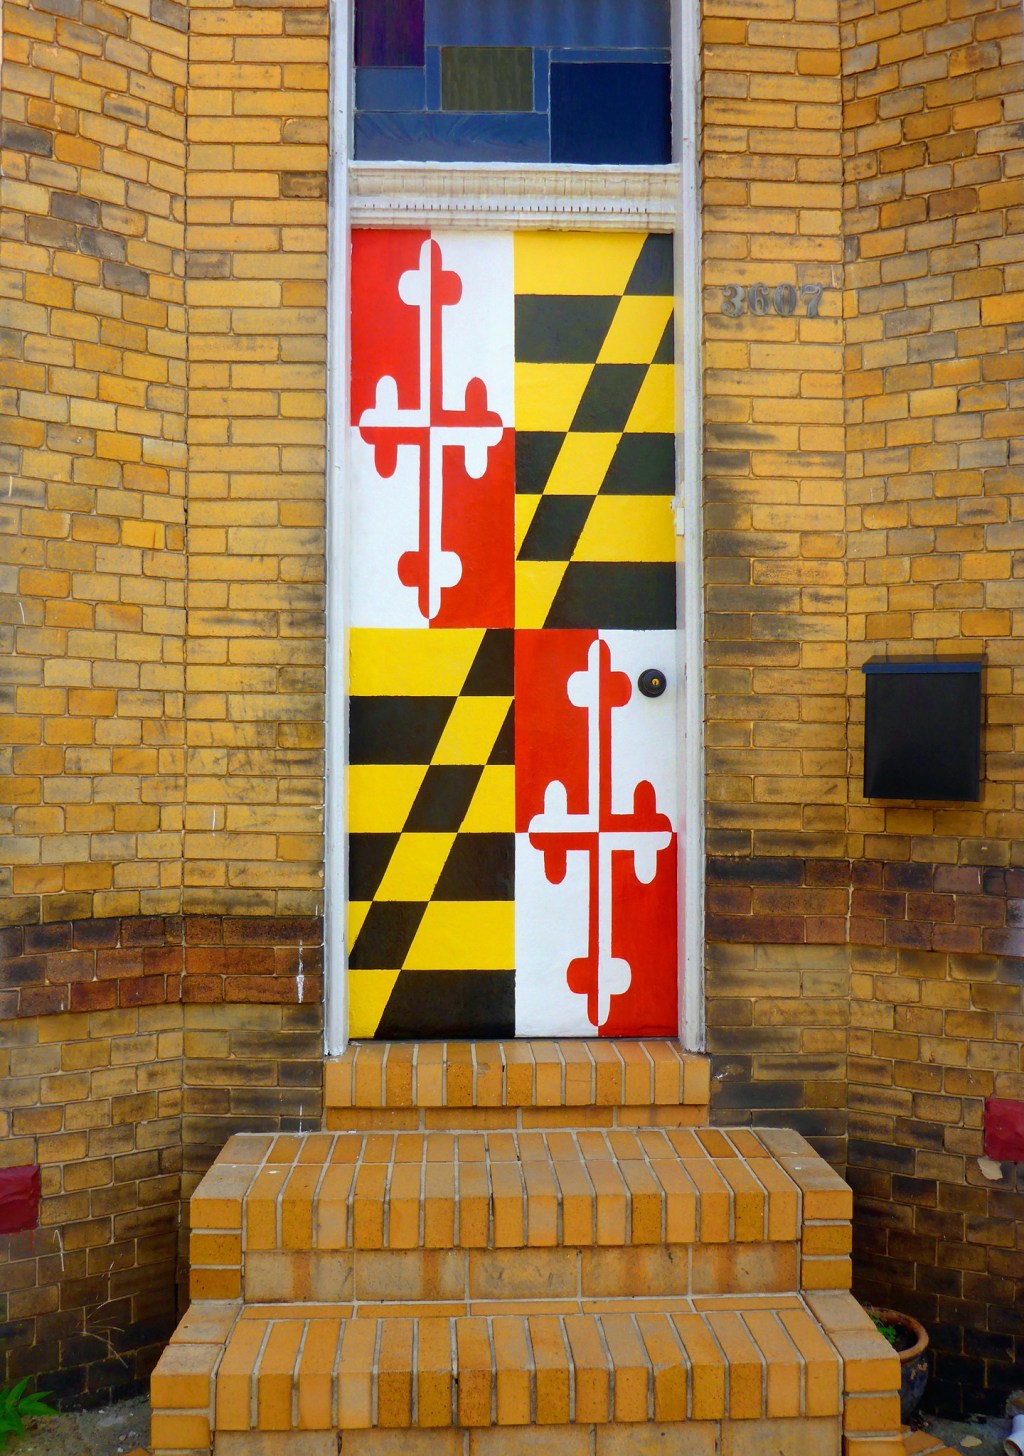 Activist draws attention to Maryland flag’s Confederate ties during #NoConfederate campaign